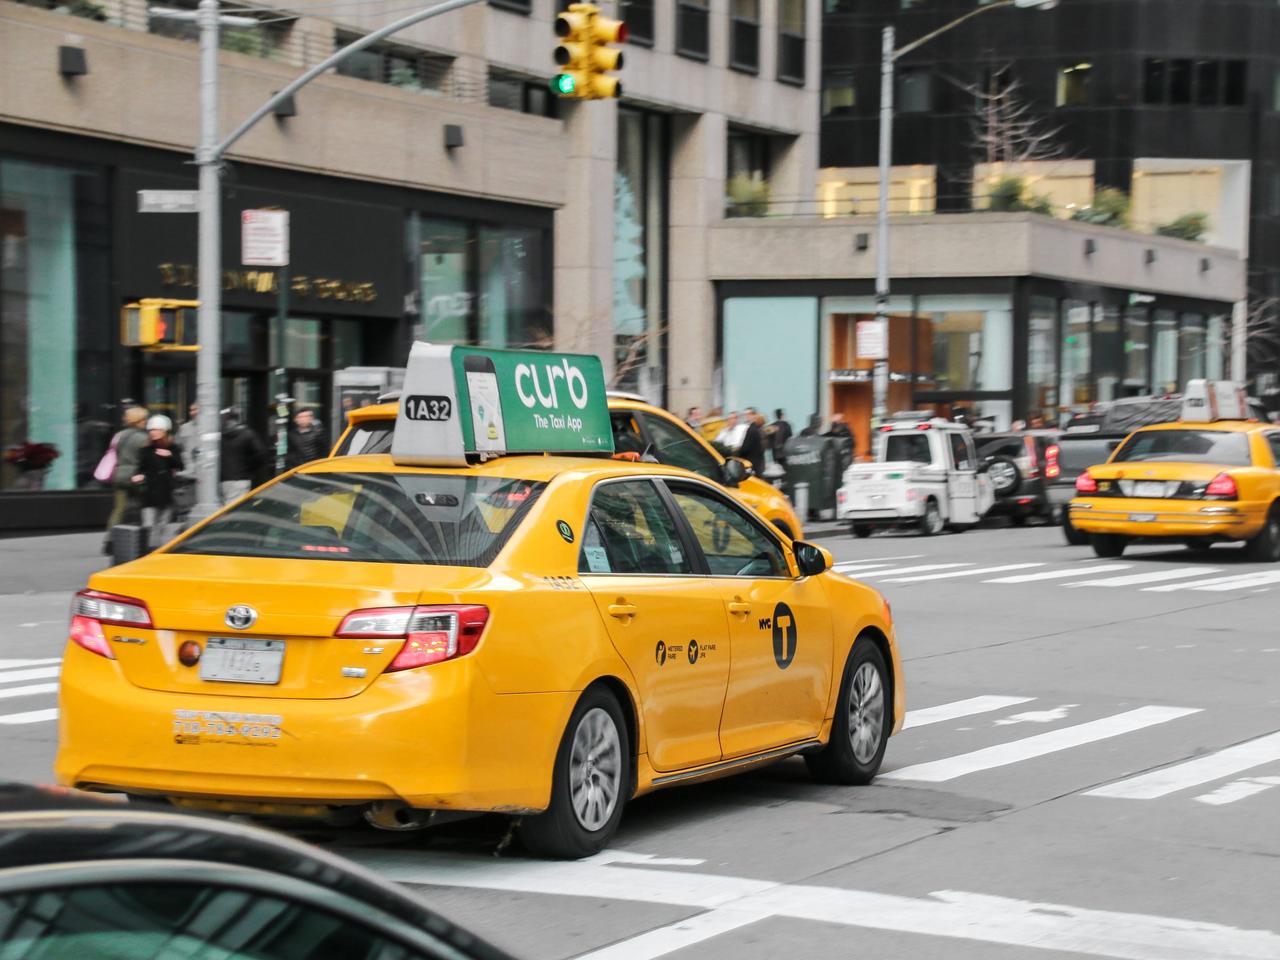 New York City cabs hailed through Curb saw a 152% increase between April and July 2021.